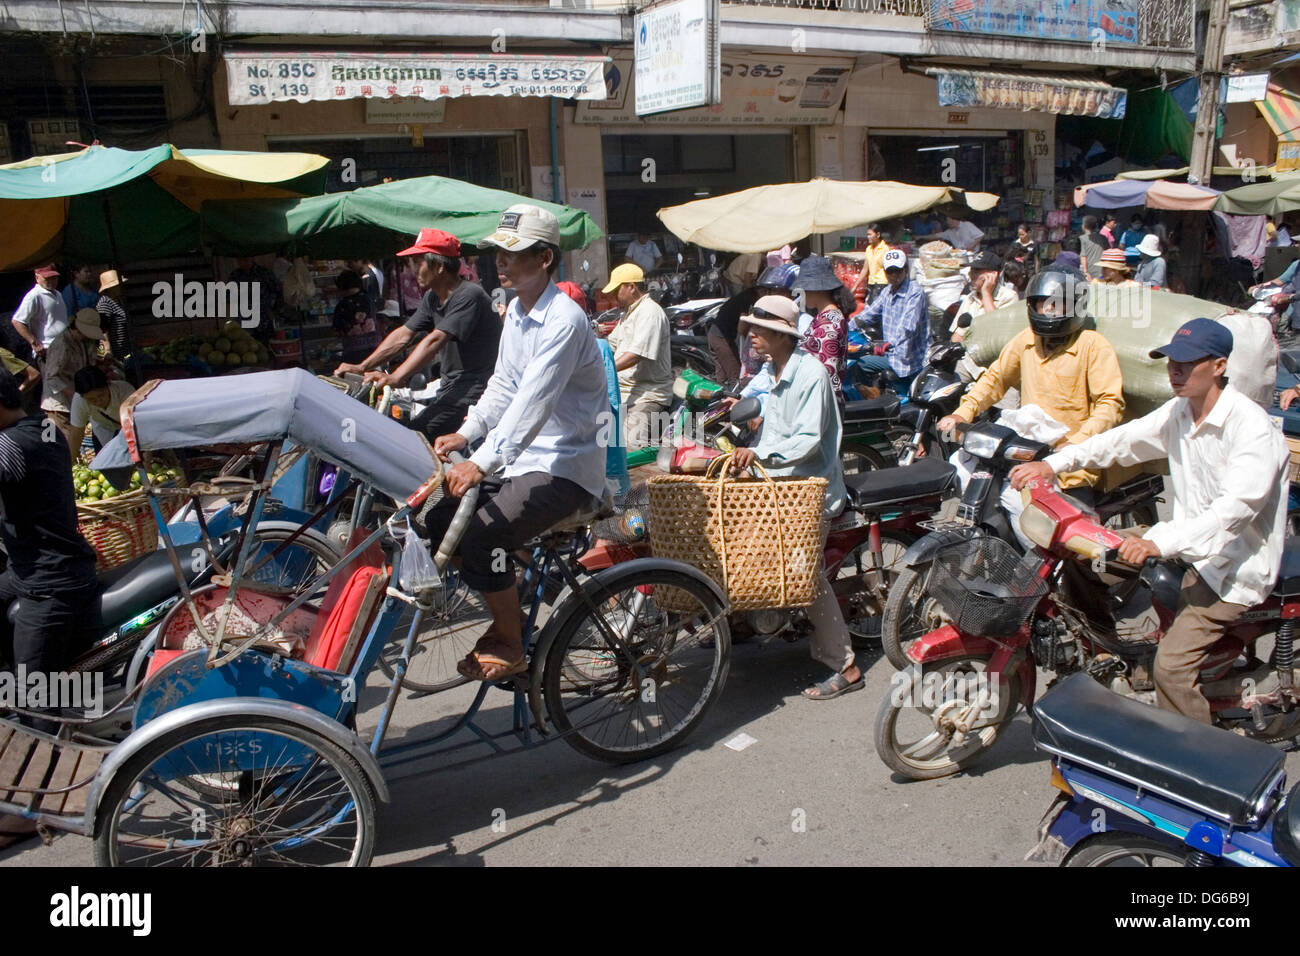 Several cyclo drivers are peddling along with motorcycle drivers on a busy street in Phnom Penh, Cambodia. Stock Photo